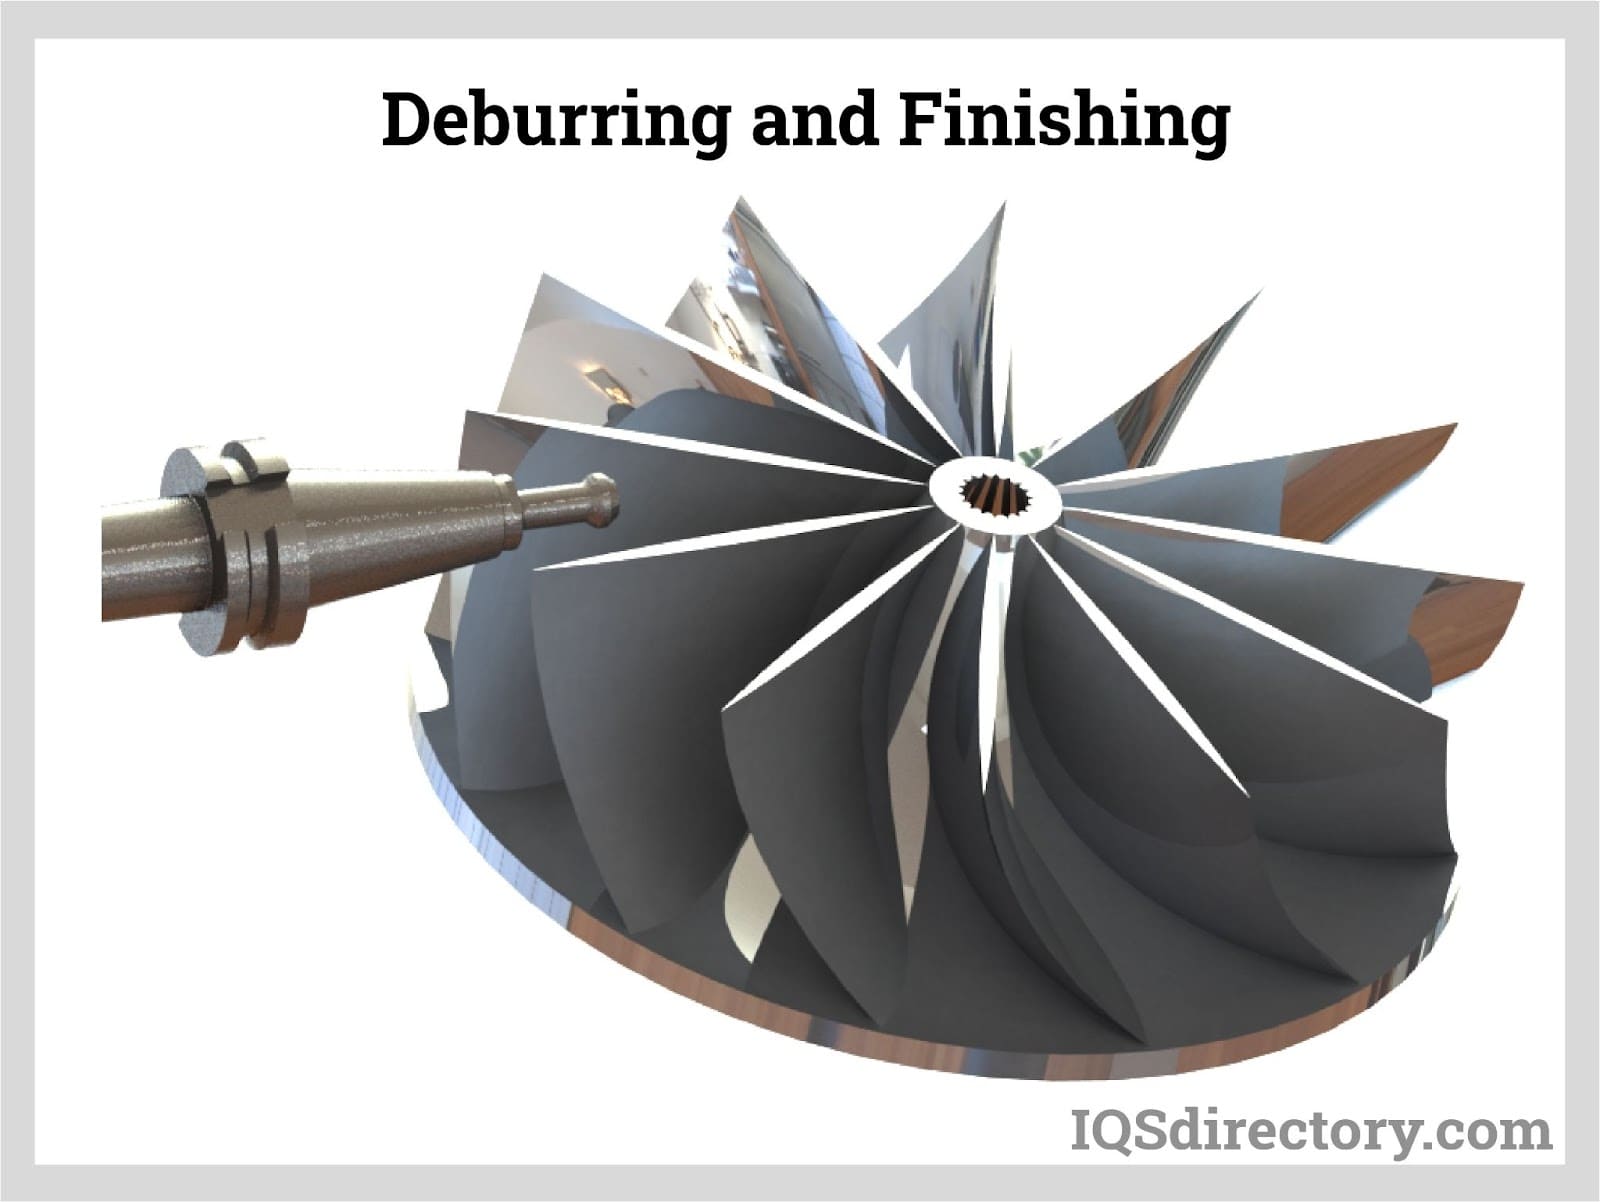 Deburring and Finishing